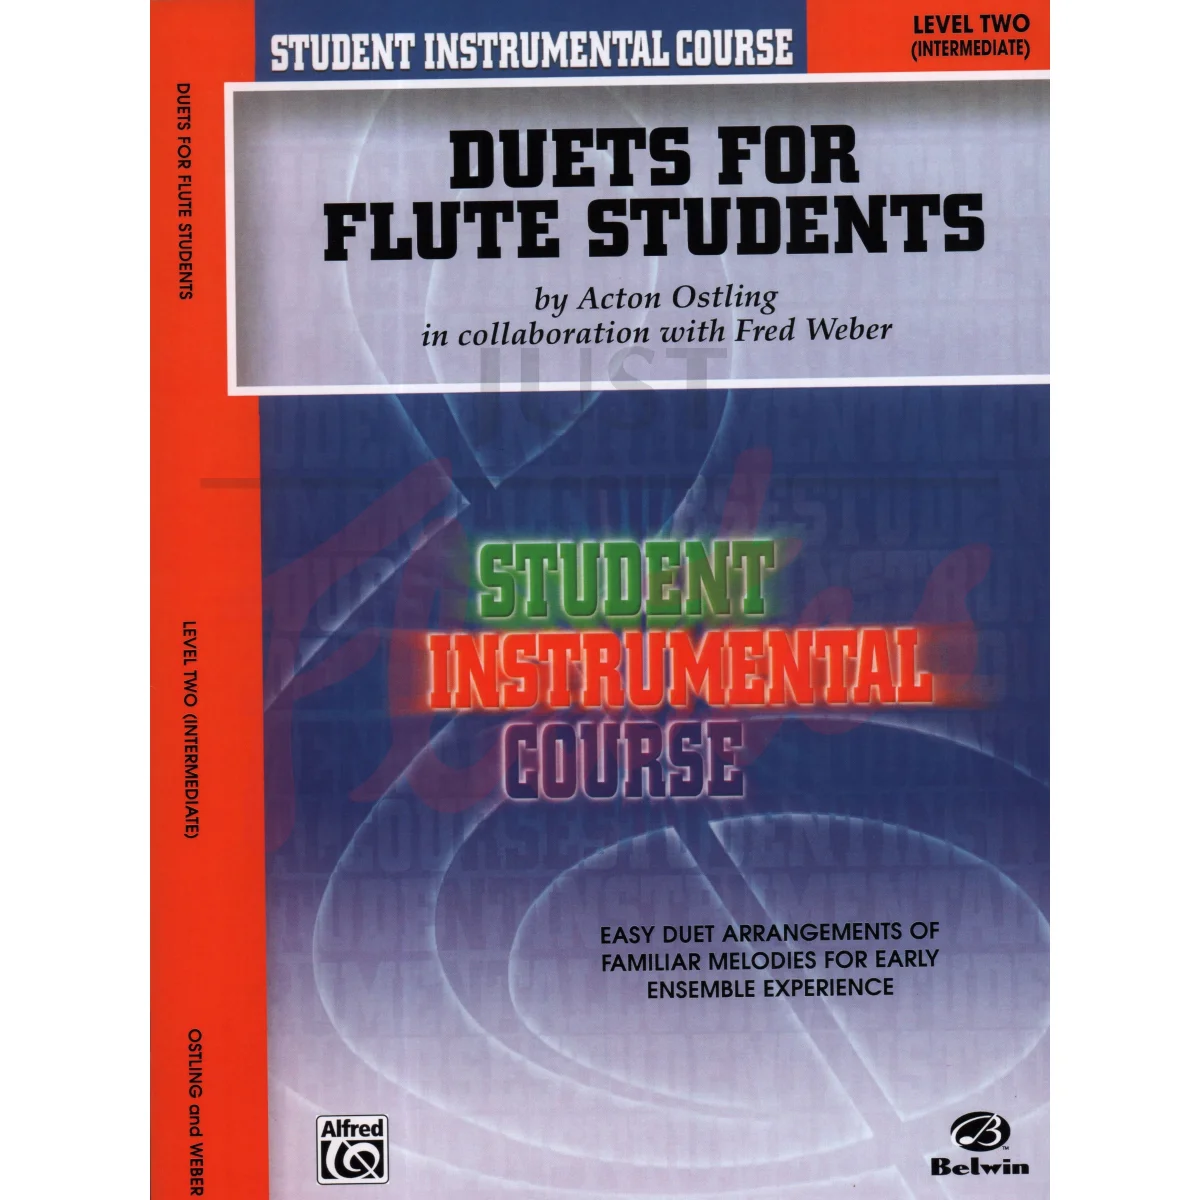 Duets for Flute Students Level Two